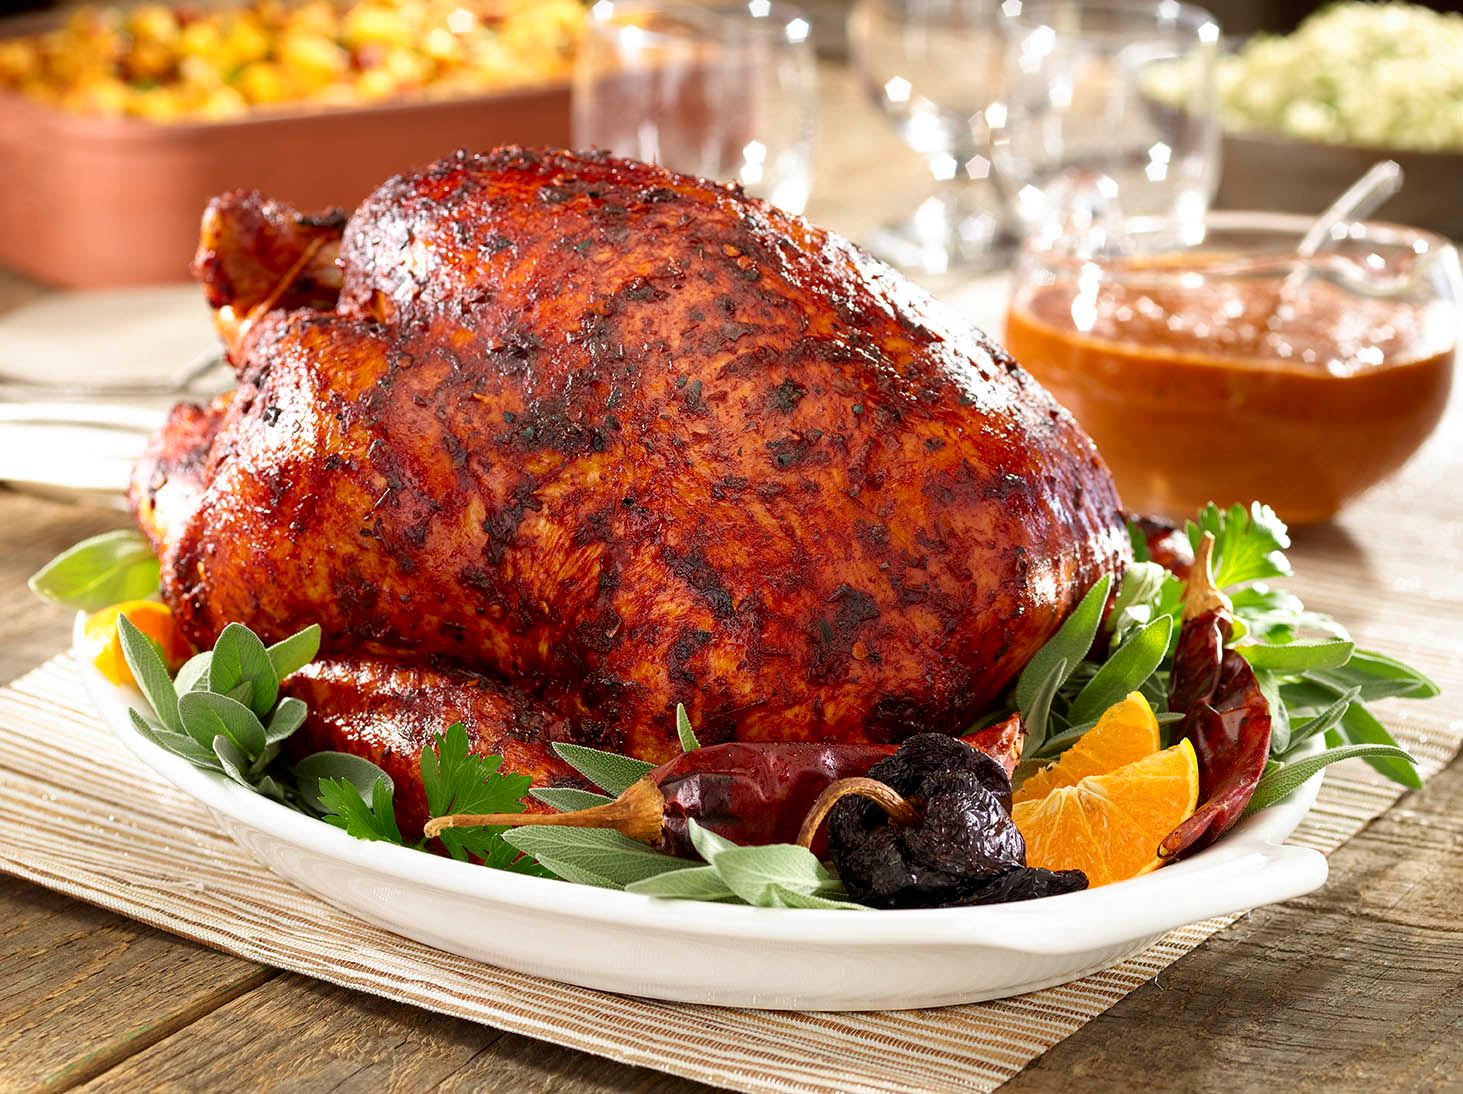 Shake up Thanksgiving with this Turkey recipe